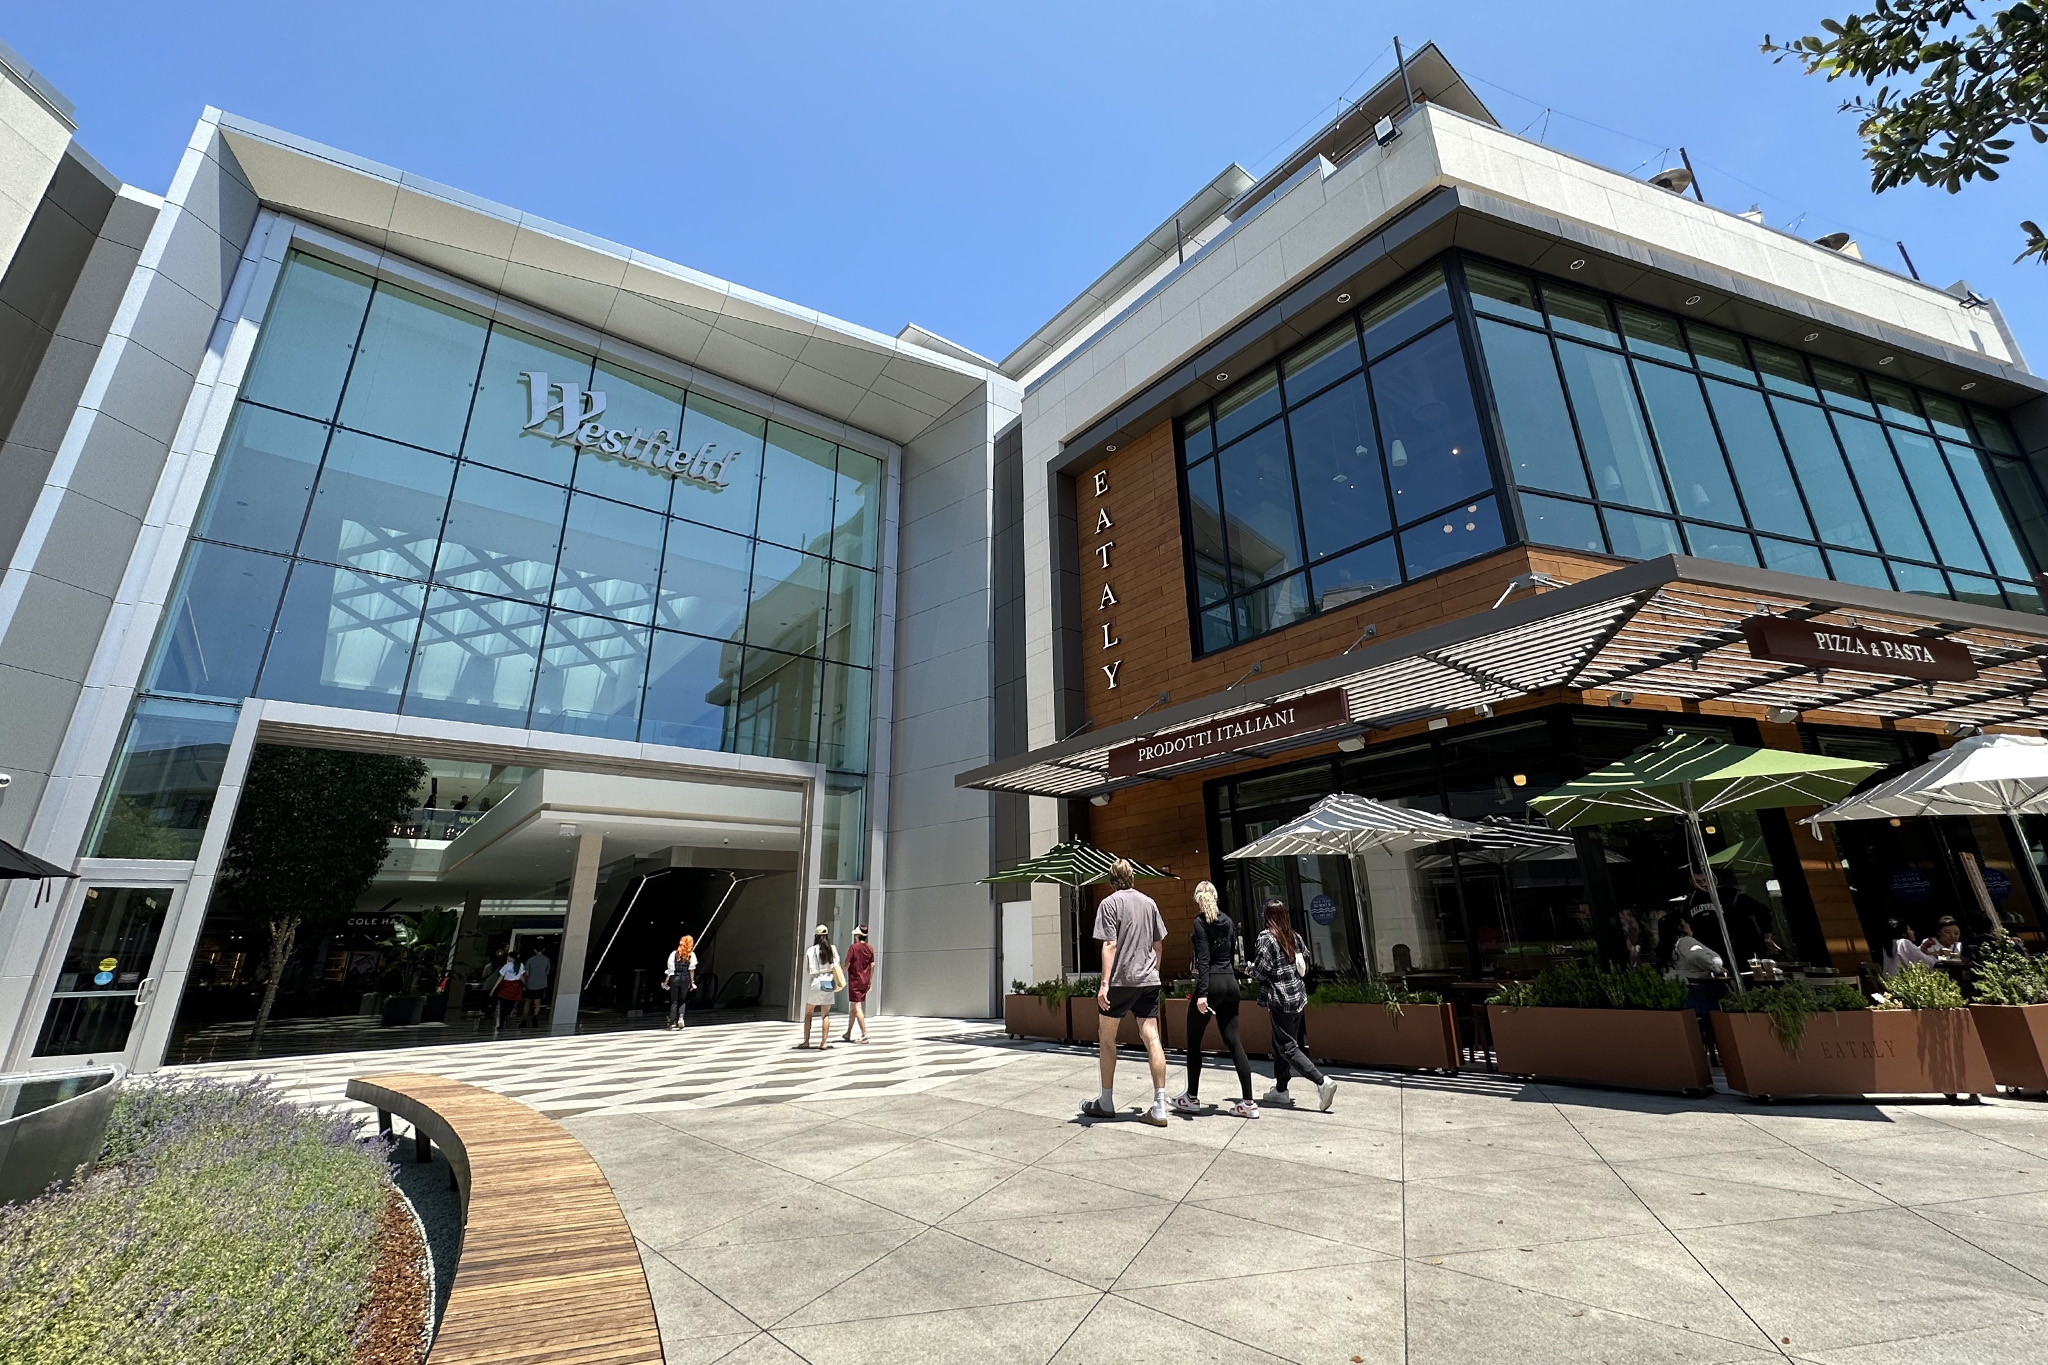 Westfield Valley Fair in San Jose Opens More Than 100 Stores Since